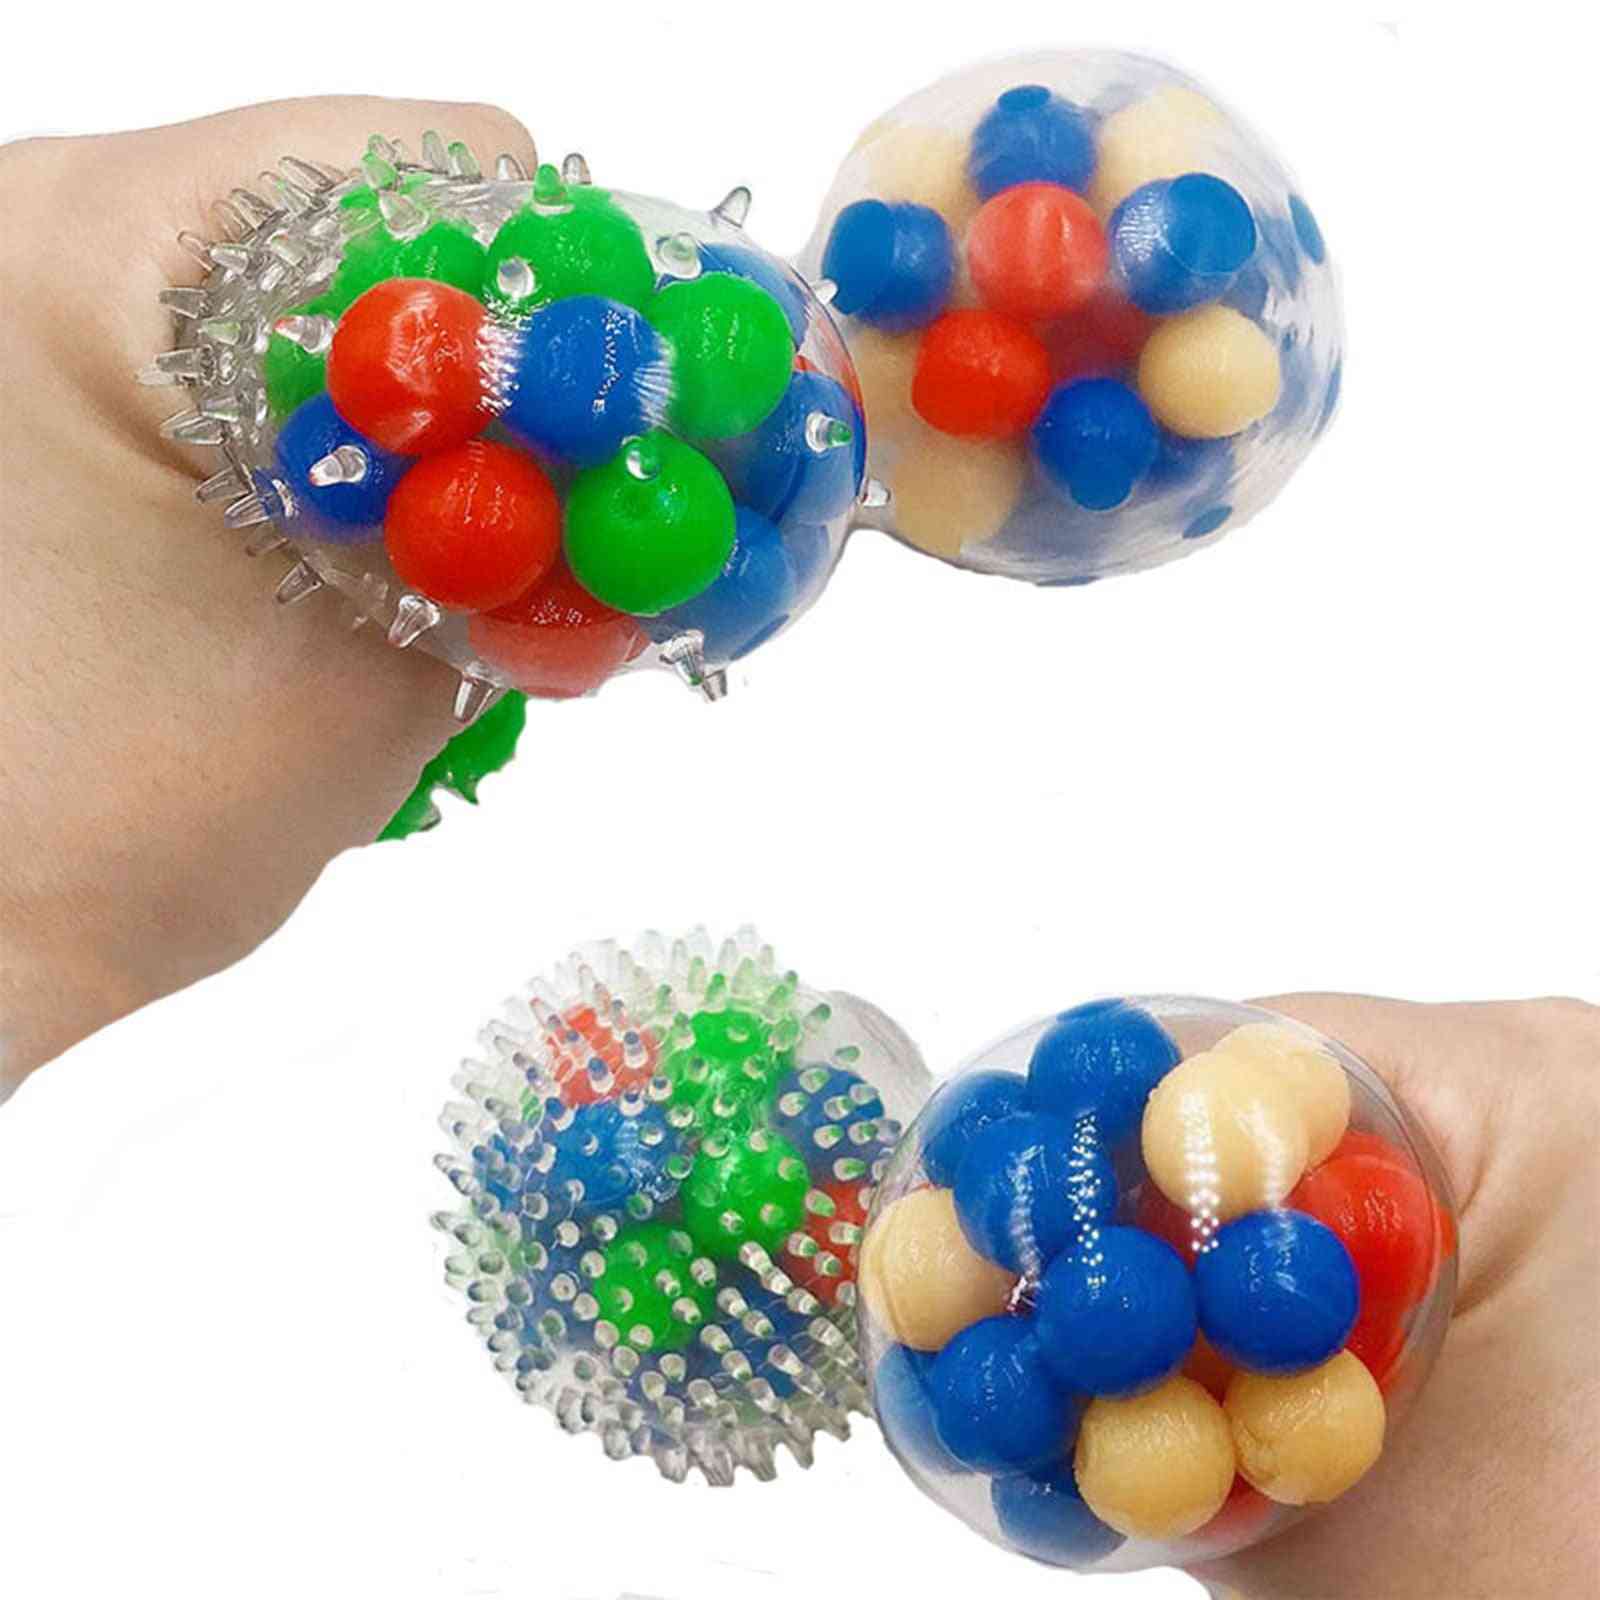 Colorful Beads, Relieve Stress, Hand Exercise, Squeeze Ball Toy